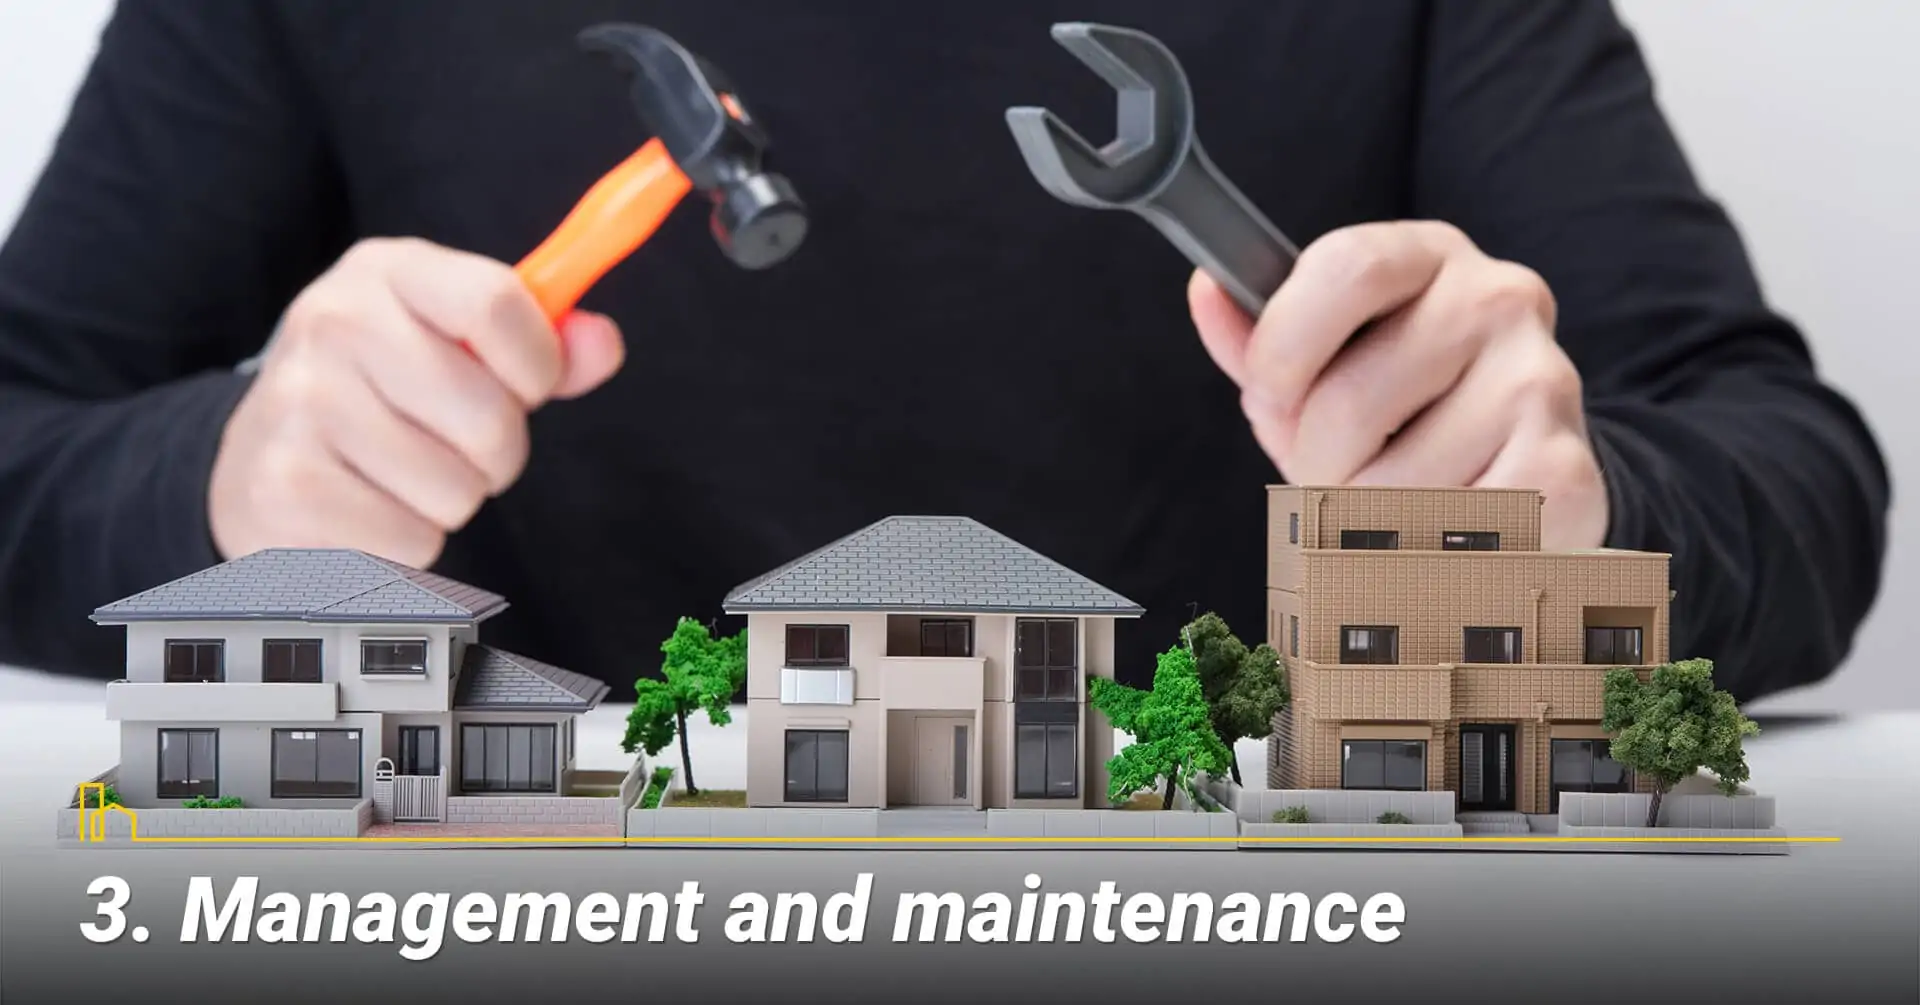 Management and maintenance, make sure to upkeep your property